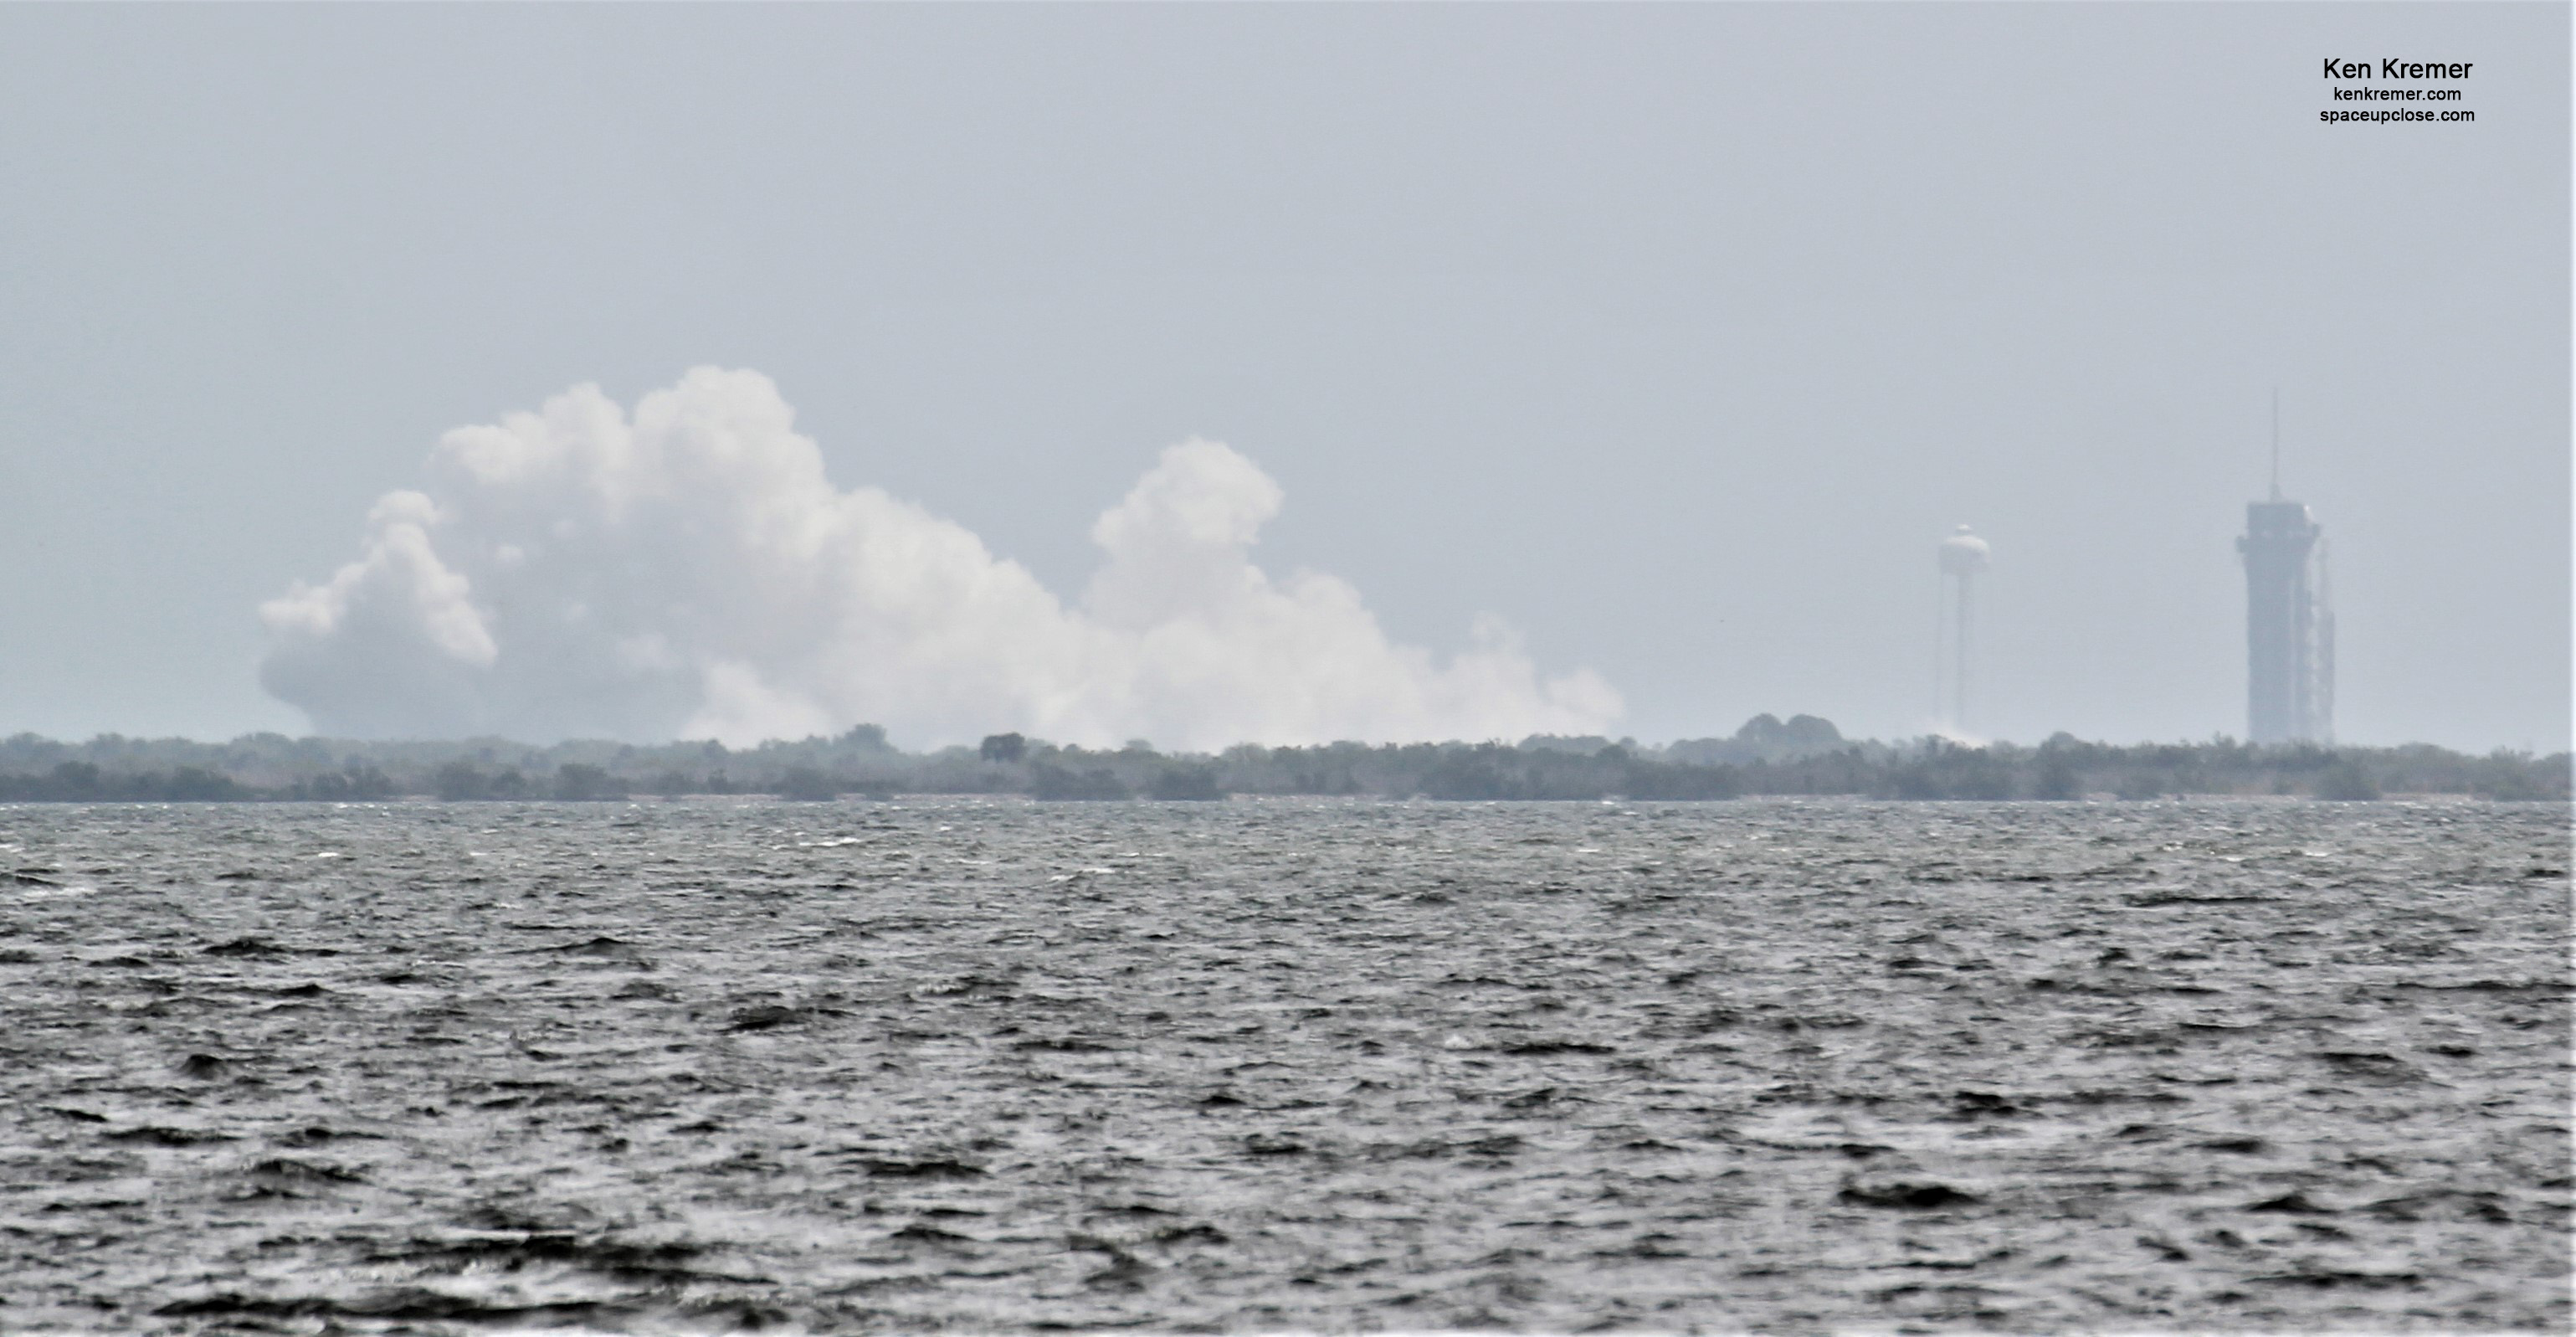 SpaceX Completes Static Fire Test for Next Starlink Launch Targeting April 23:  Photos